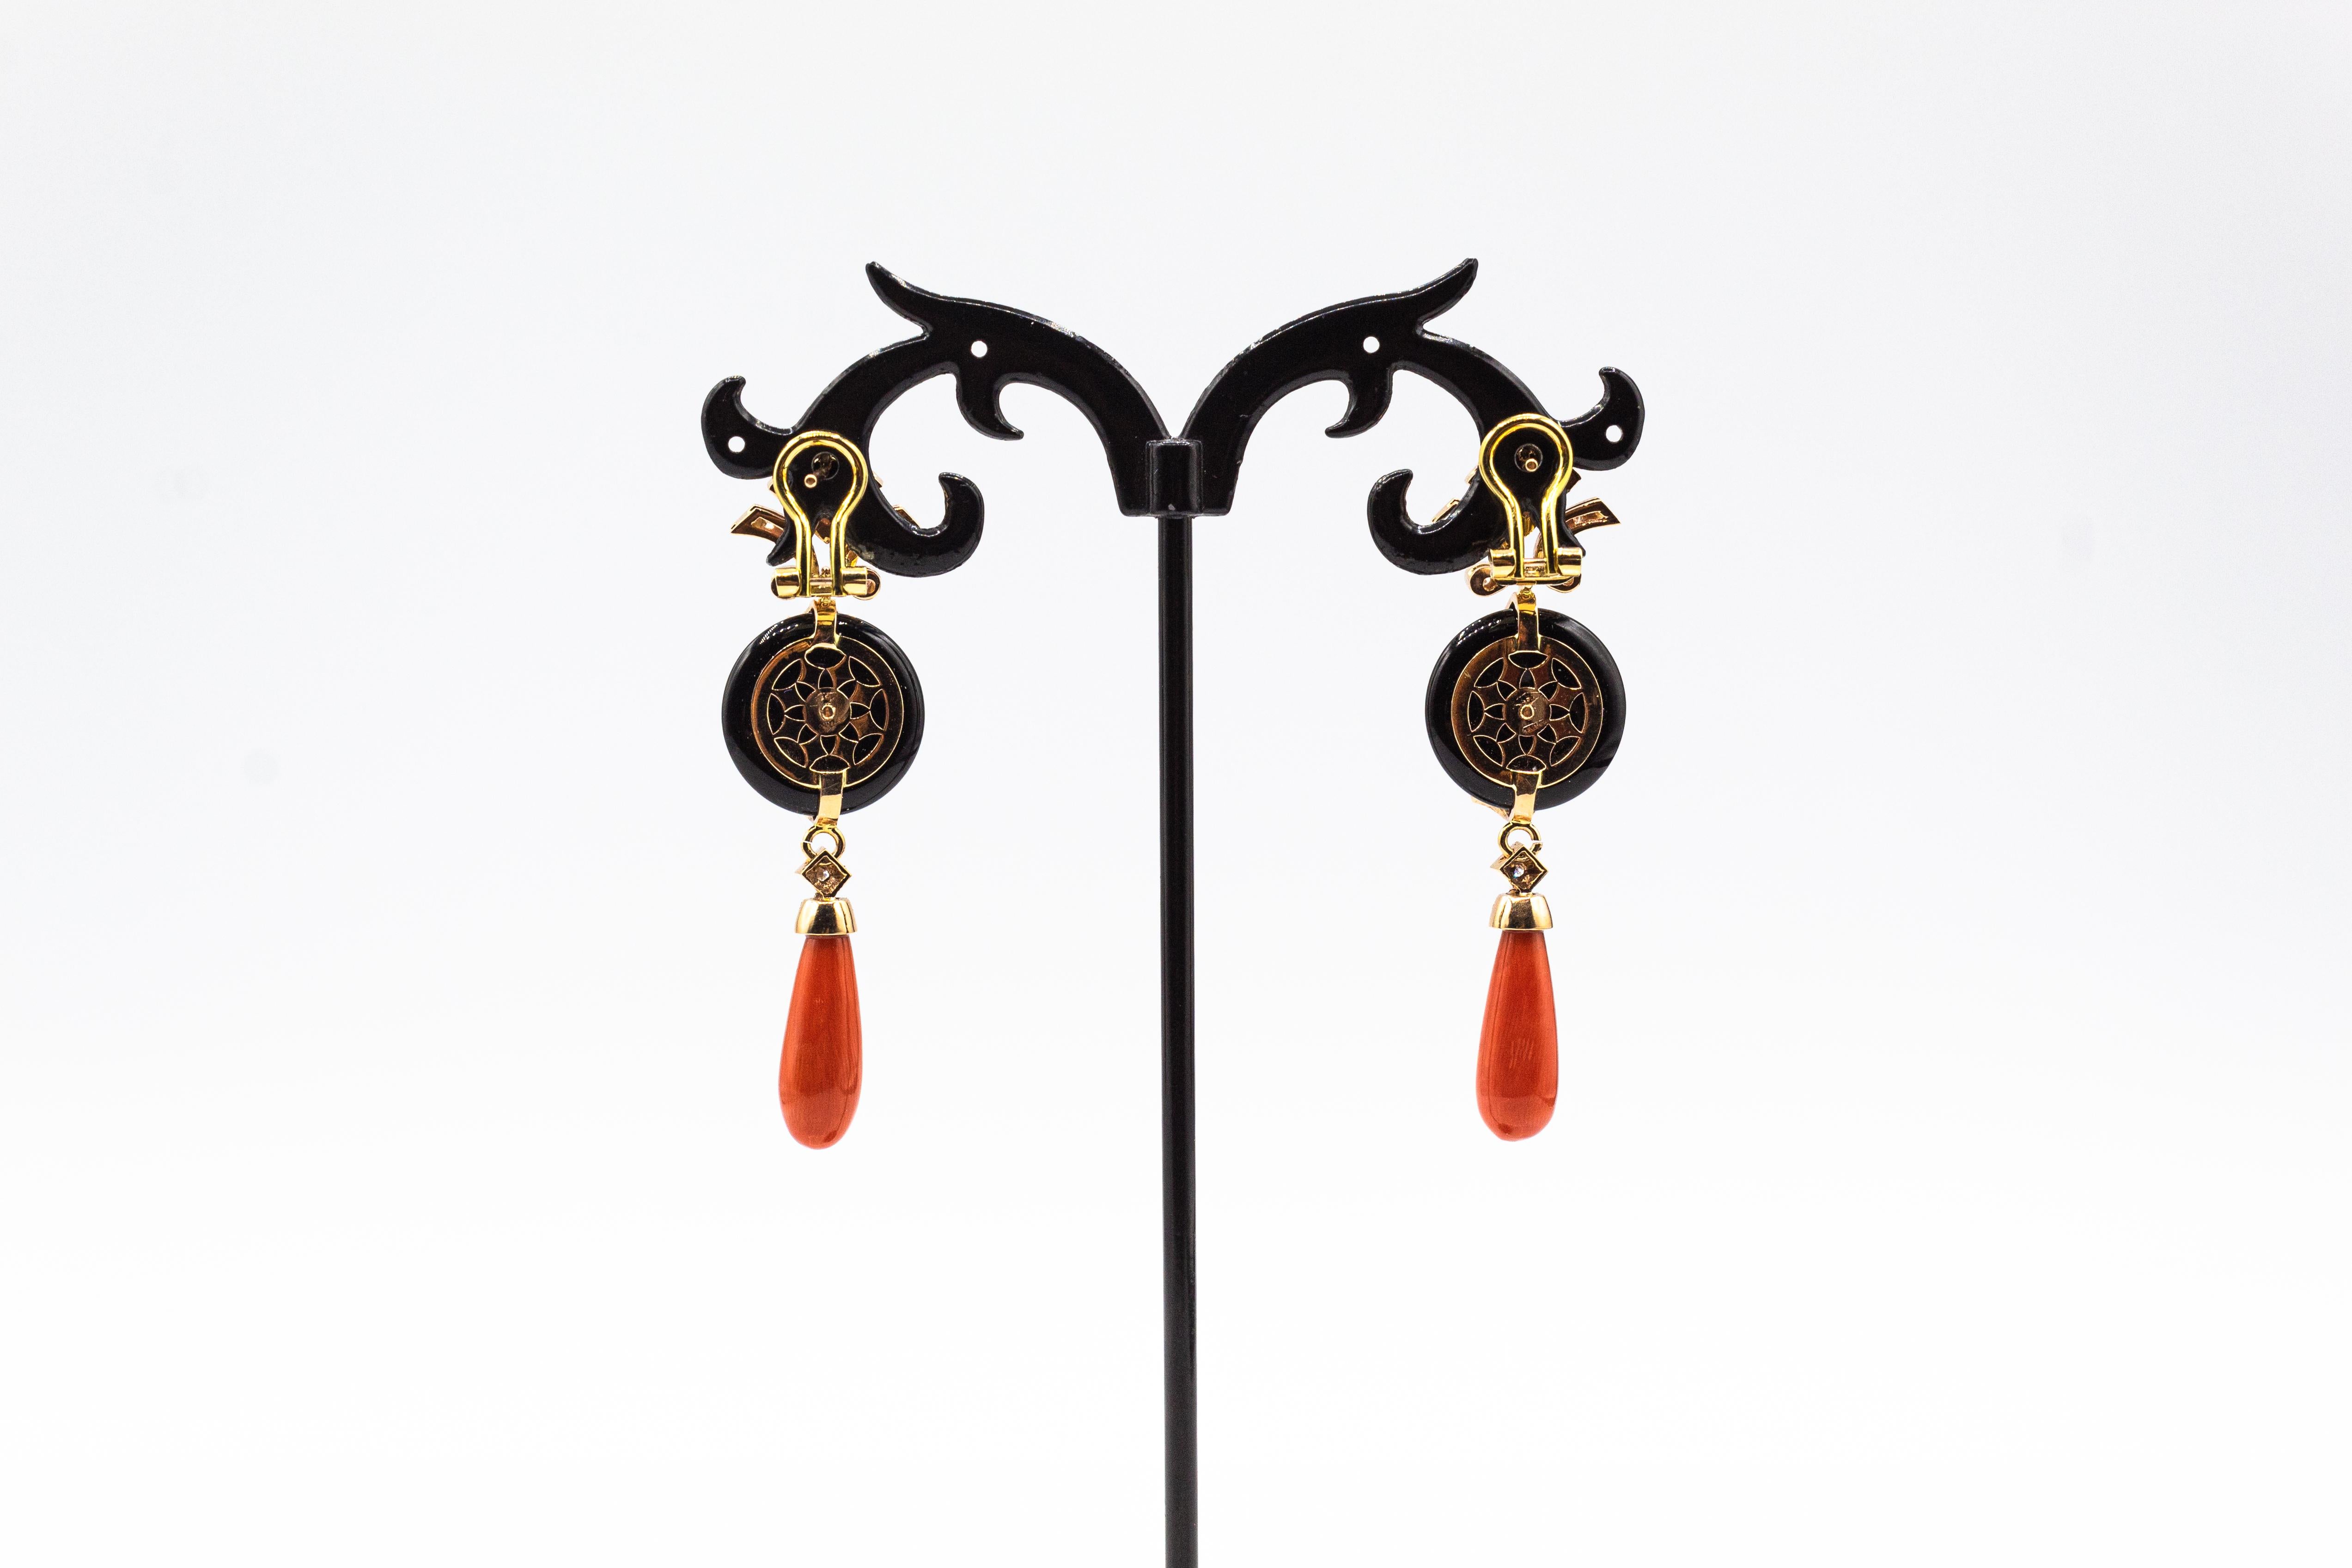 Brilliant Cut Art Deco Style Mediterranean Red Coral White Diamond Onyx Yellow Gold Earrings For Sale